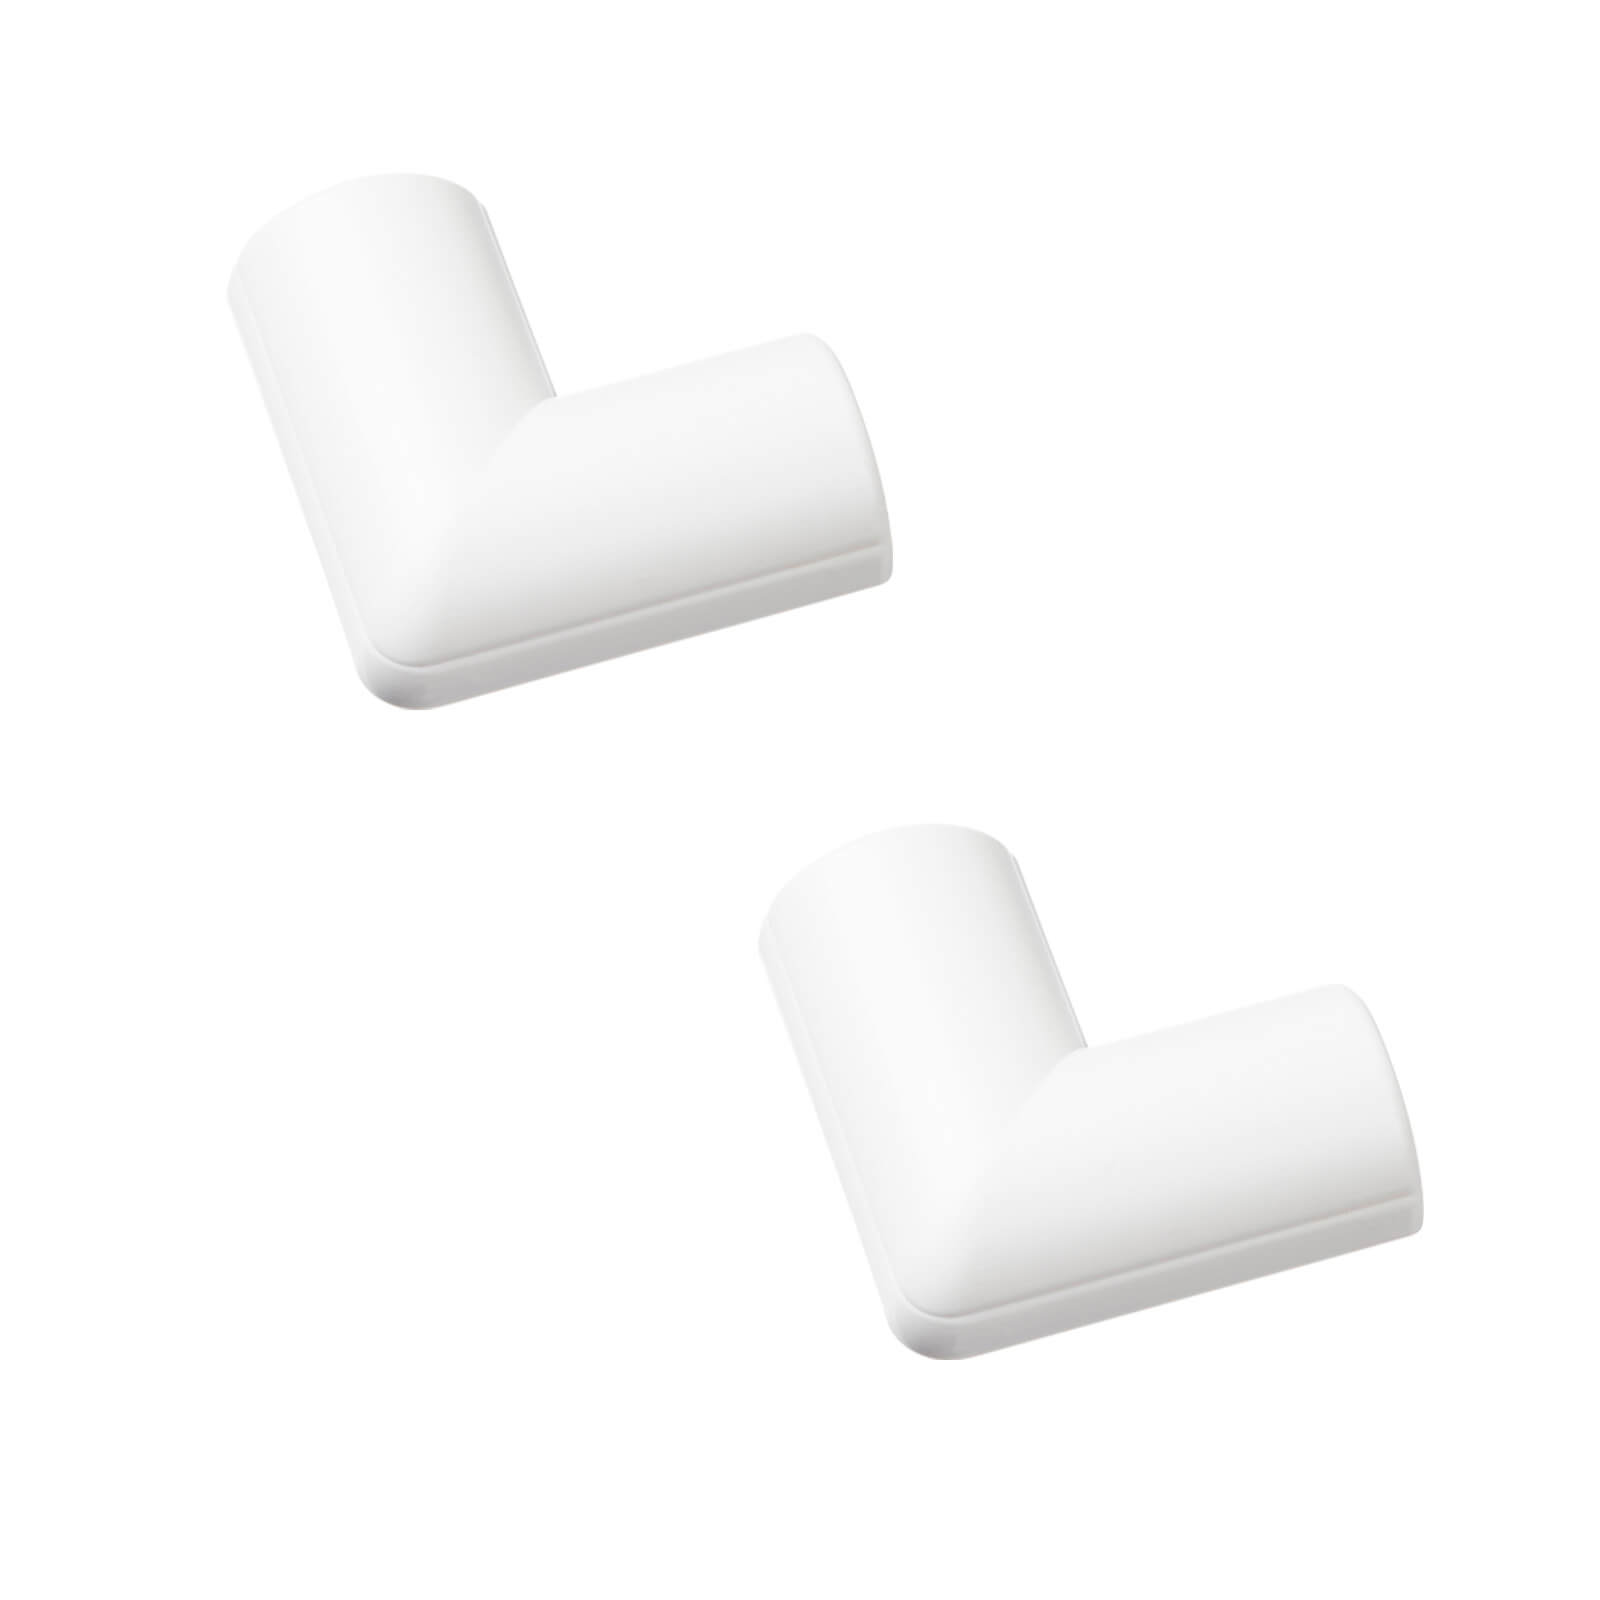 Photo of D-line Mini Decorative Trunking Clip Over Flat Bends 2 Pack 30mm X 15mm White